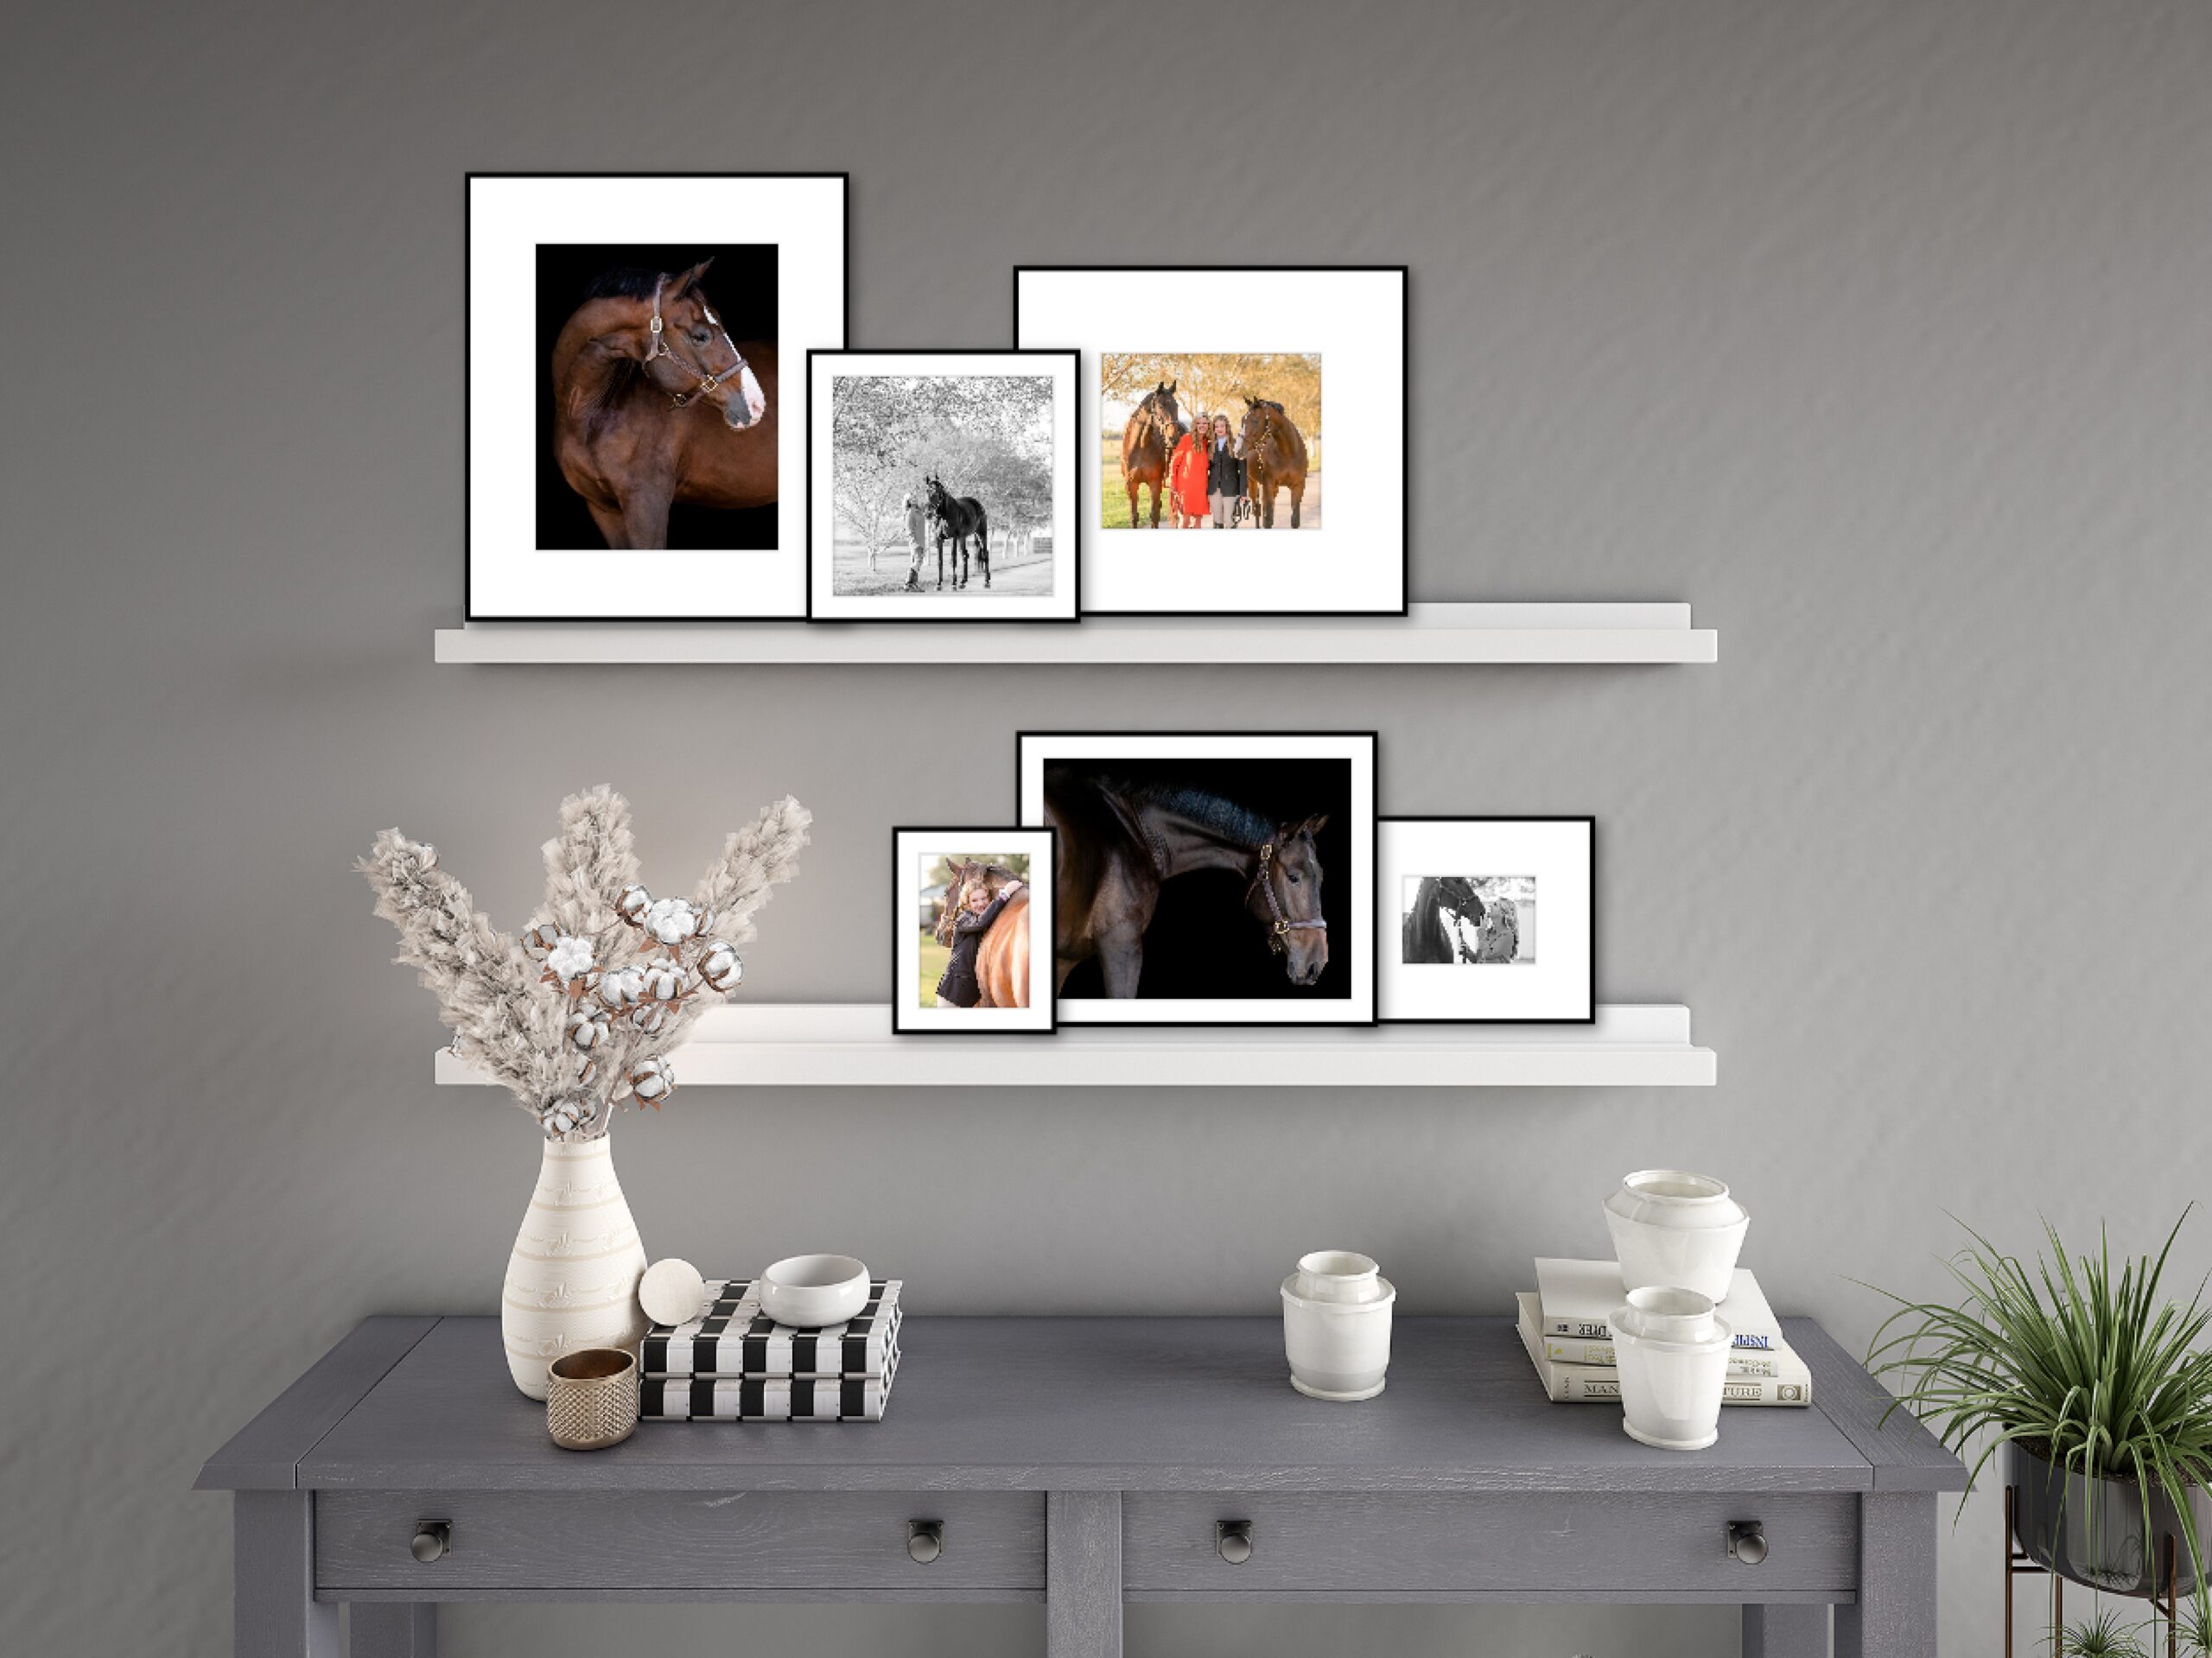 Six framed photos of horses or a horse and rider are displayed on photo ledge shelves.